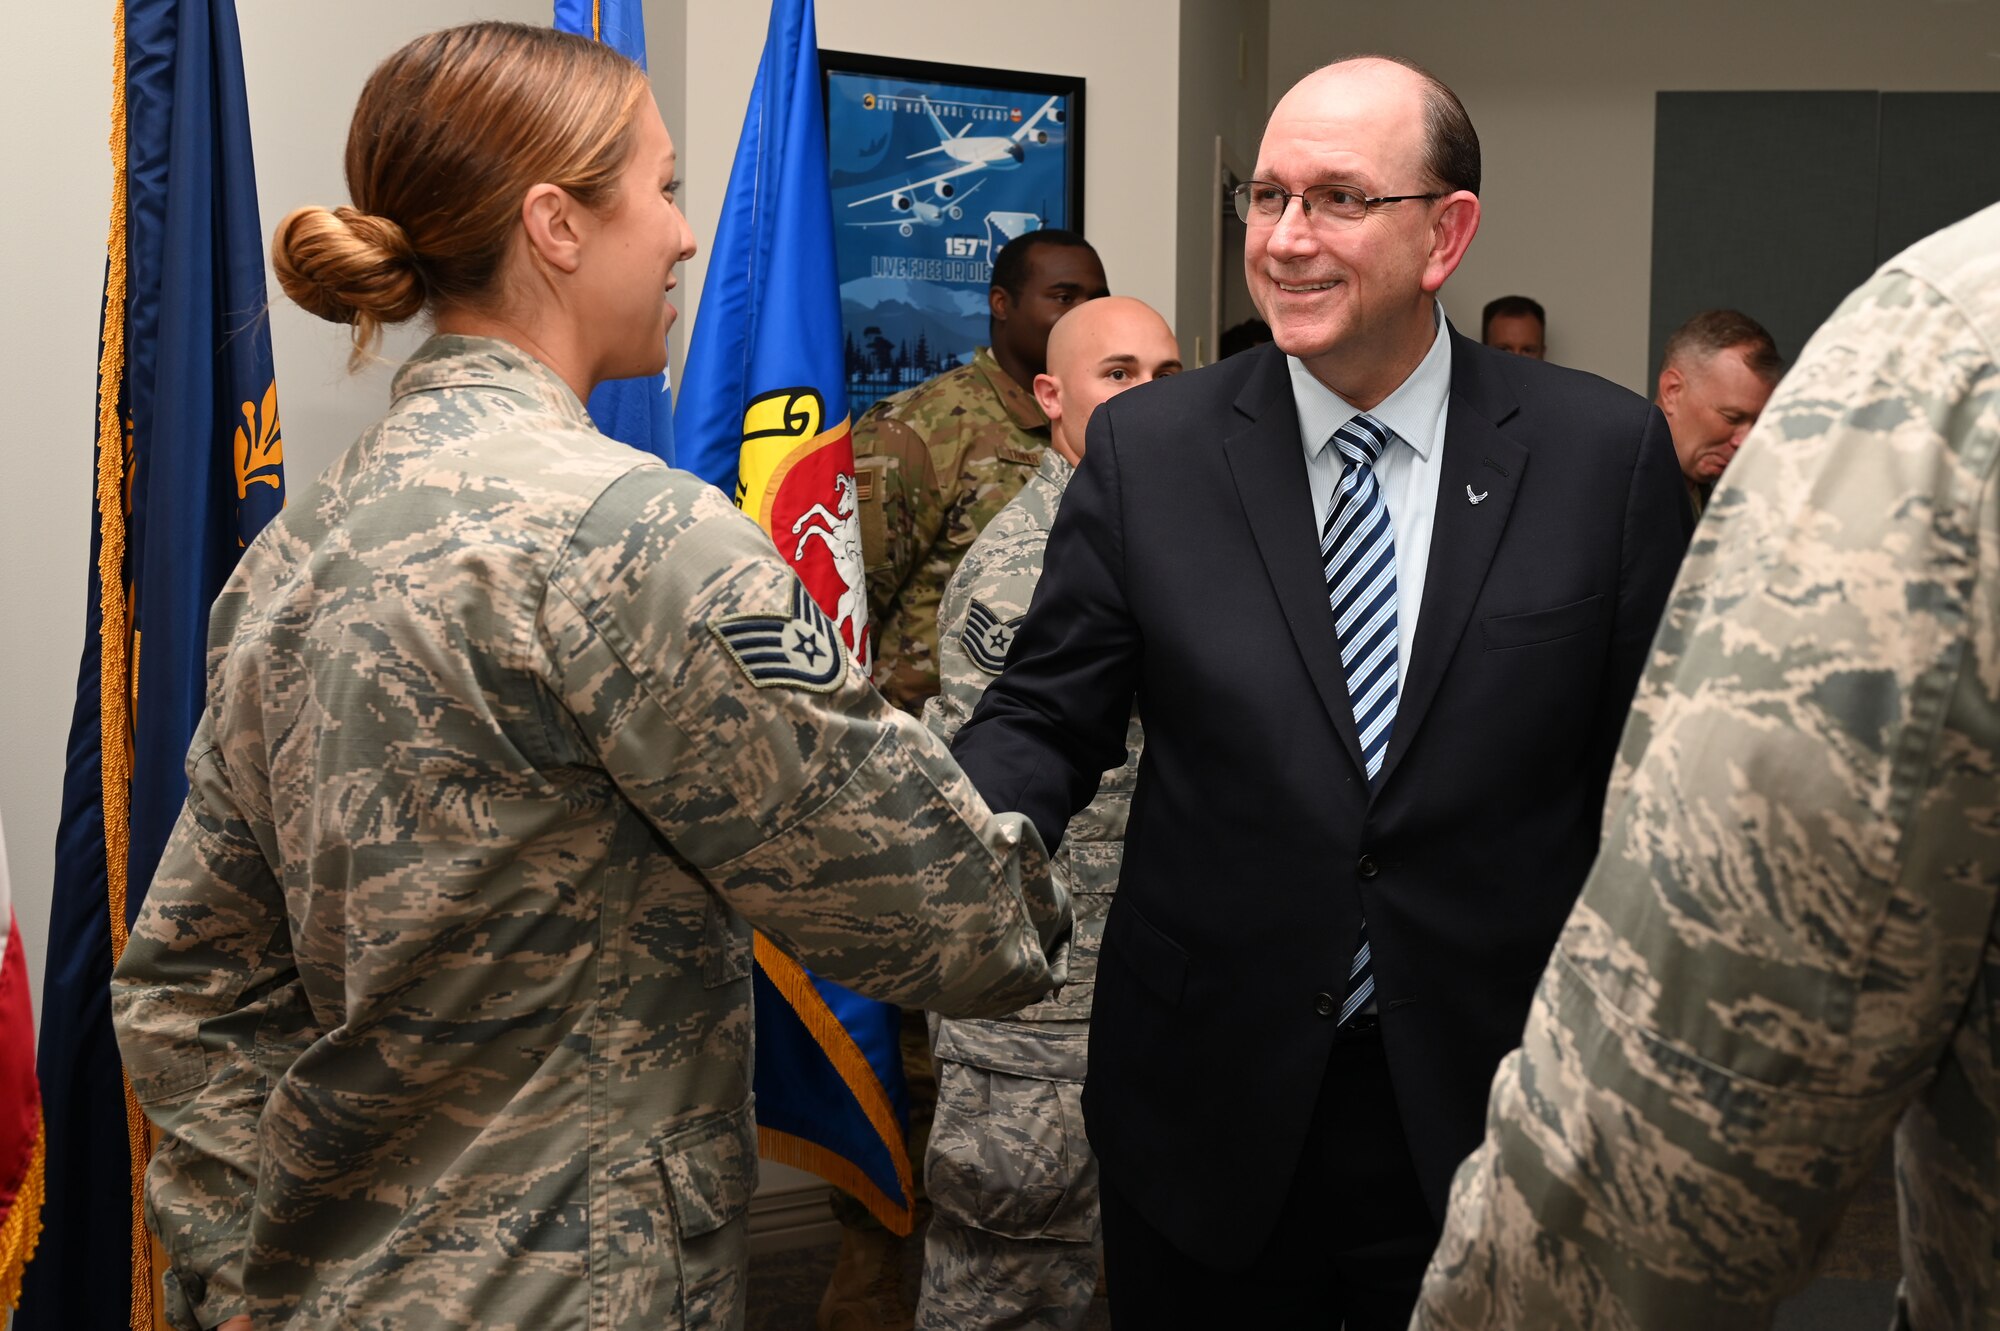 Matthew Donovan, the acting secretary of the Air Force, is greeted by Staff Sgt. Ashley Shipman, an Airmen assigned to the 157th Air Refueling Wing, Pease Air National Guard Base, N.H., Aug. 8, 2019. Donovan attended a welcoming event at the base to commemorate the arrival of the KC-46A air refueling tanker. Pease was the first National Guard Base to receive the new aircraft, which replaced the divested KC-135 Stratotanker. Hundreds of people attended a welcoming event held along the flight line to usher in the new era of aerial refuelers and future generations of Pease Airmen. (U. S. Air National Guard photo by Staff Sgt. Charles Johnston)